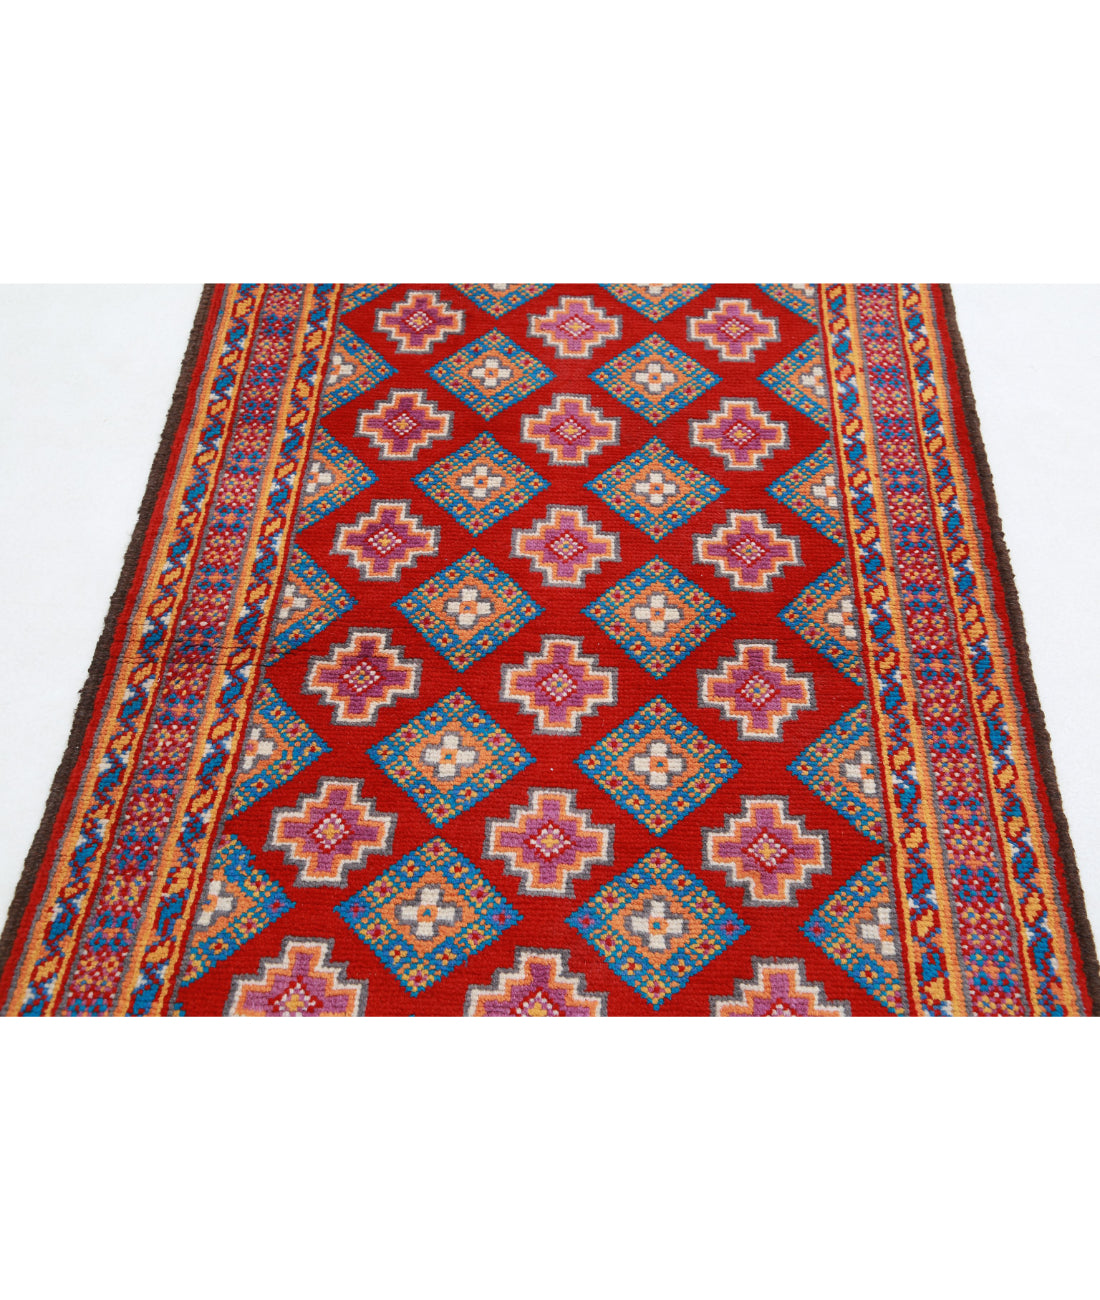 Revival 3'5'' X 4'11'' Hand-Knotted Wool Rug 3'5'' x 4'11'' (103 X 148) / Red / Gold